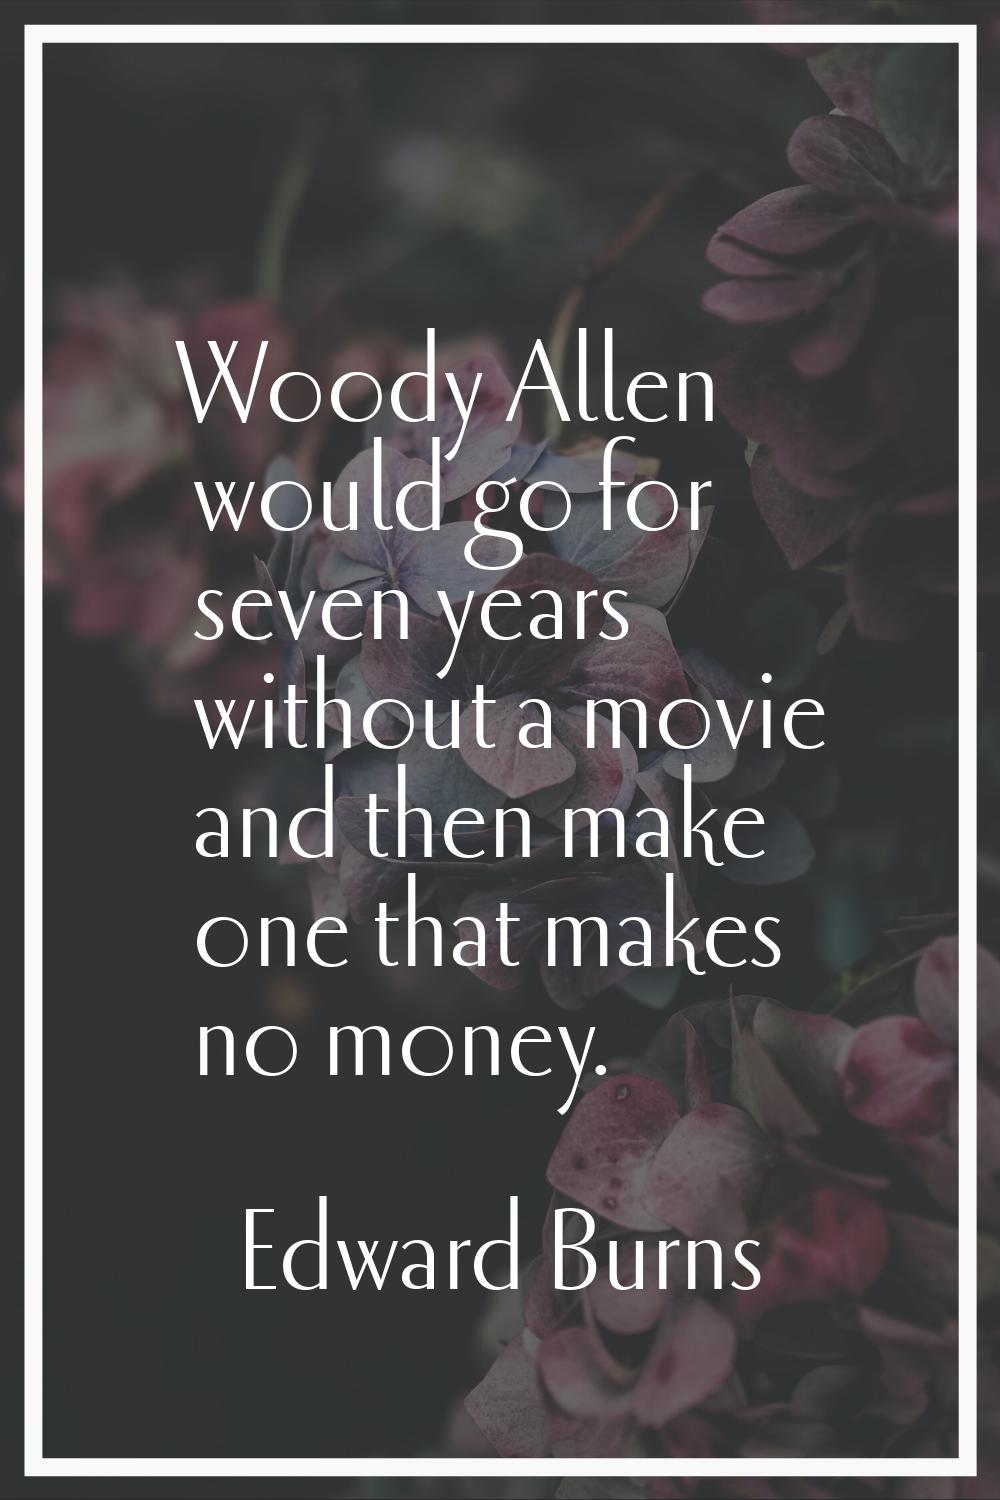 Woody Allen would go for seven years without a movie and then make one that makes no money.